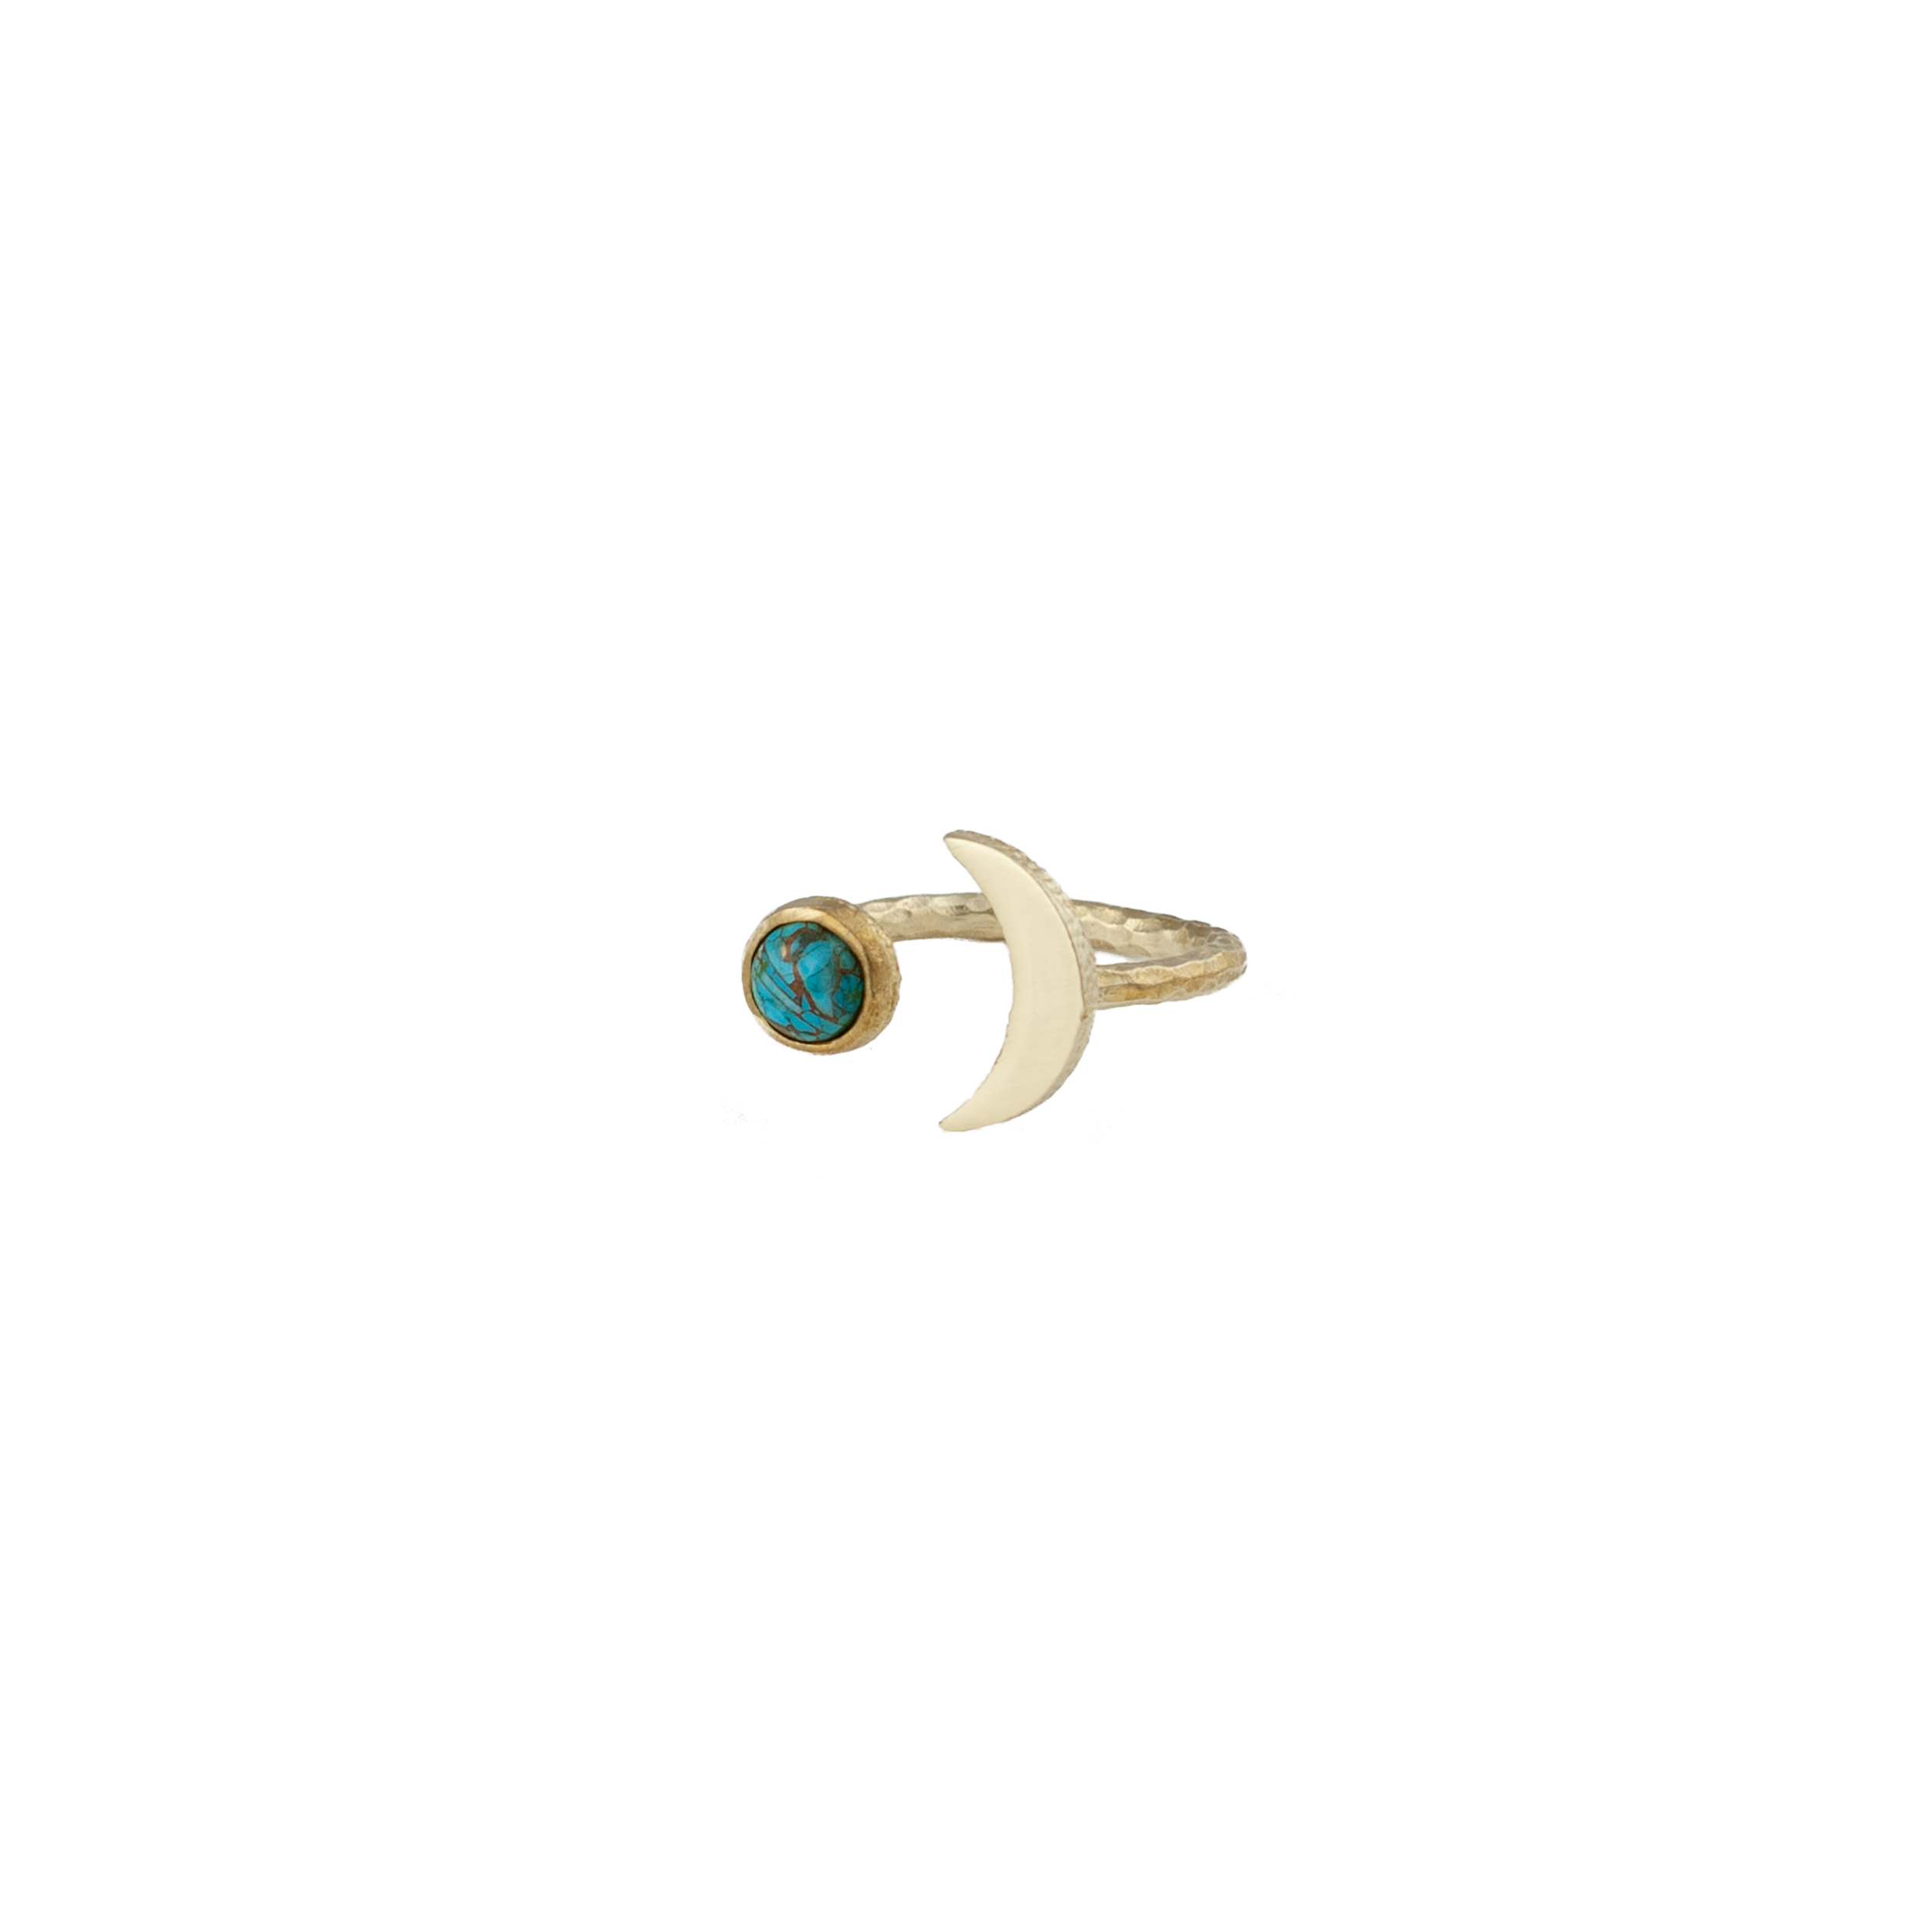 Moon shaped ring with brass and natural turquoise gemstone